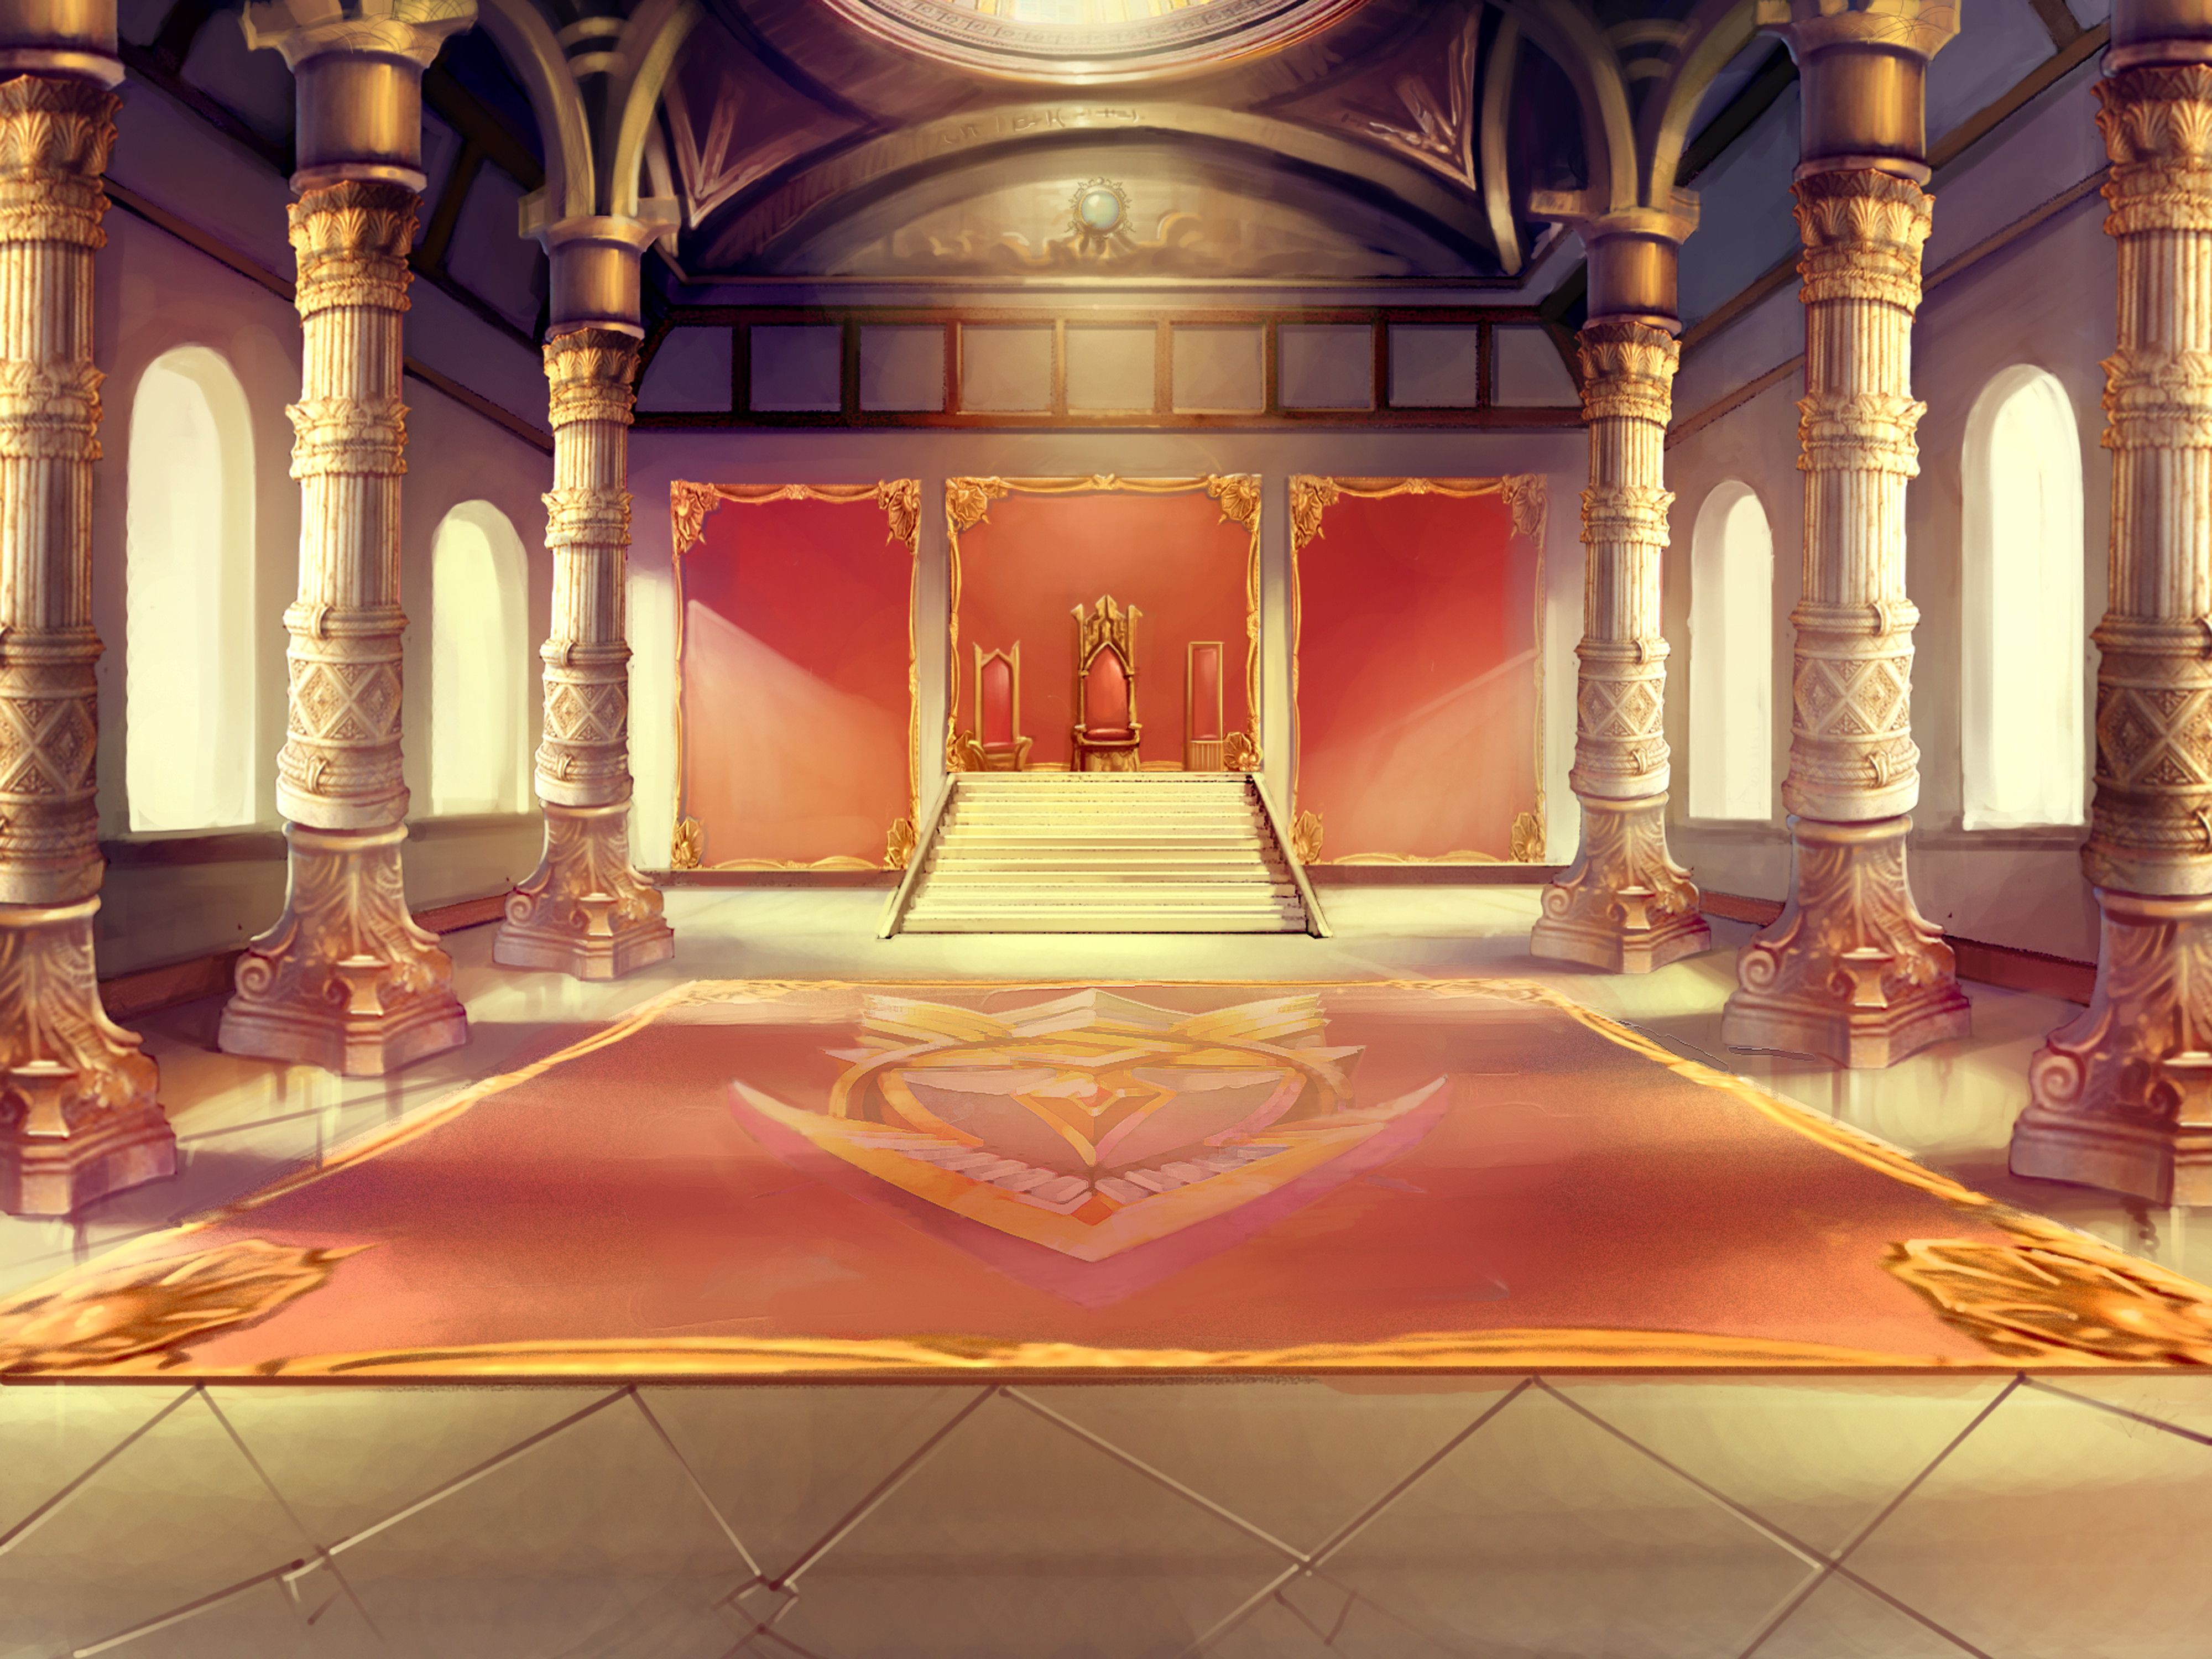 This is as close as I can find to how I picture Obrias Great Hall